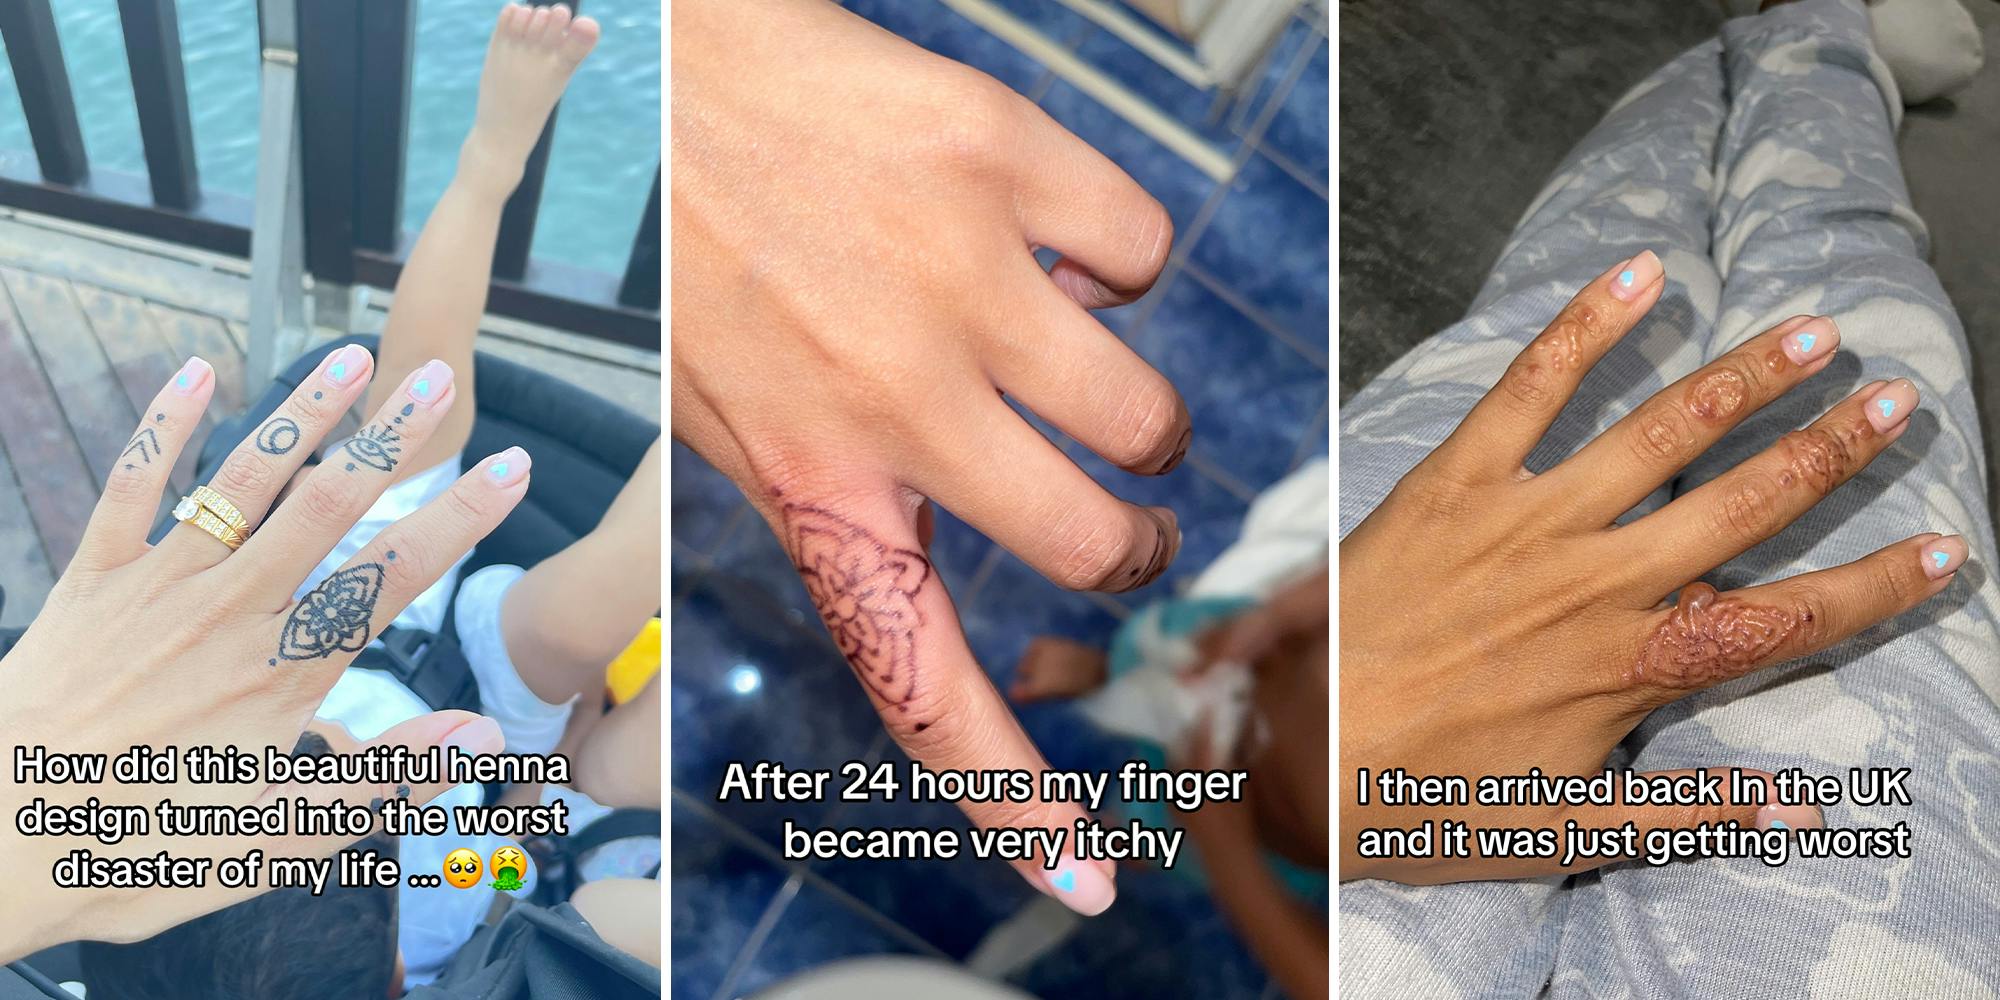 Woman gets henna tattoo on her hands. It becomes the 'worst disaster' of her life